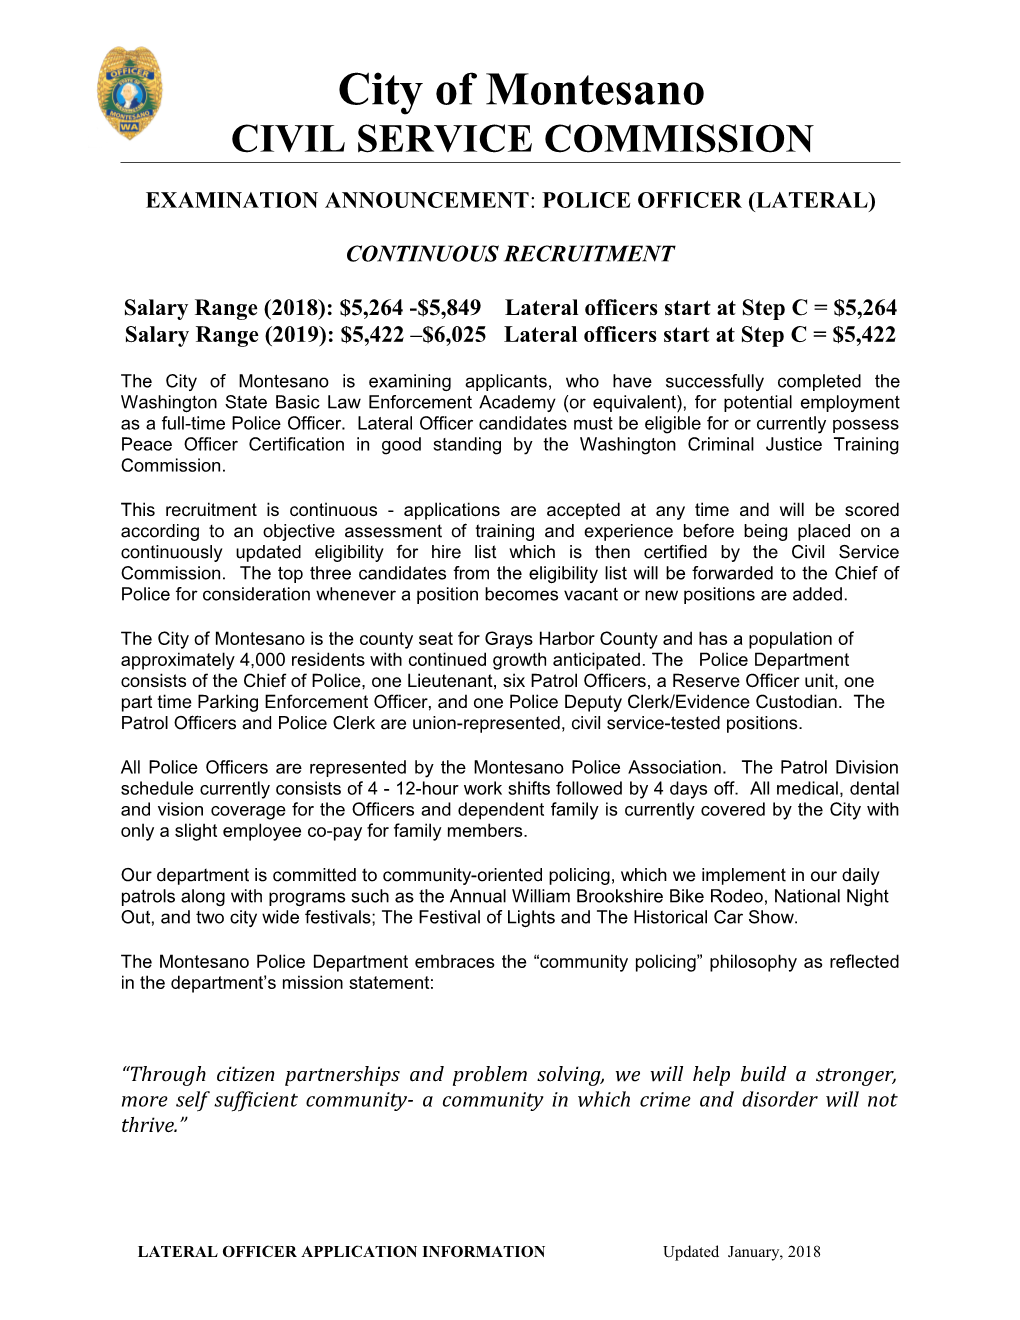 Examination Announcement: Police Officer (Lateral)